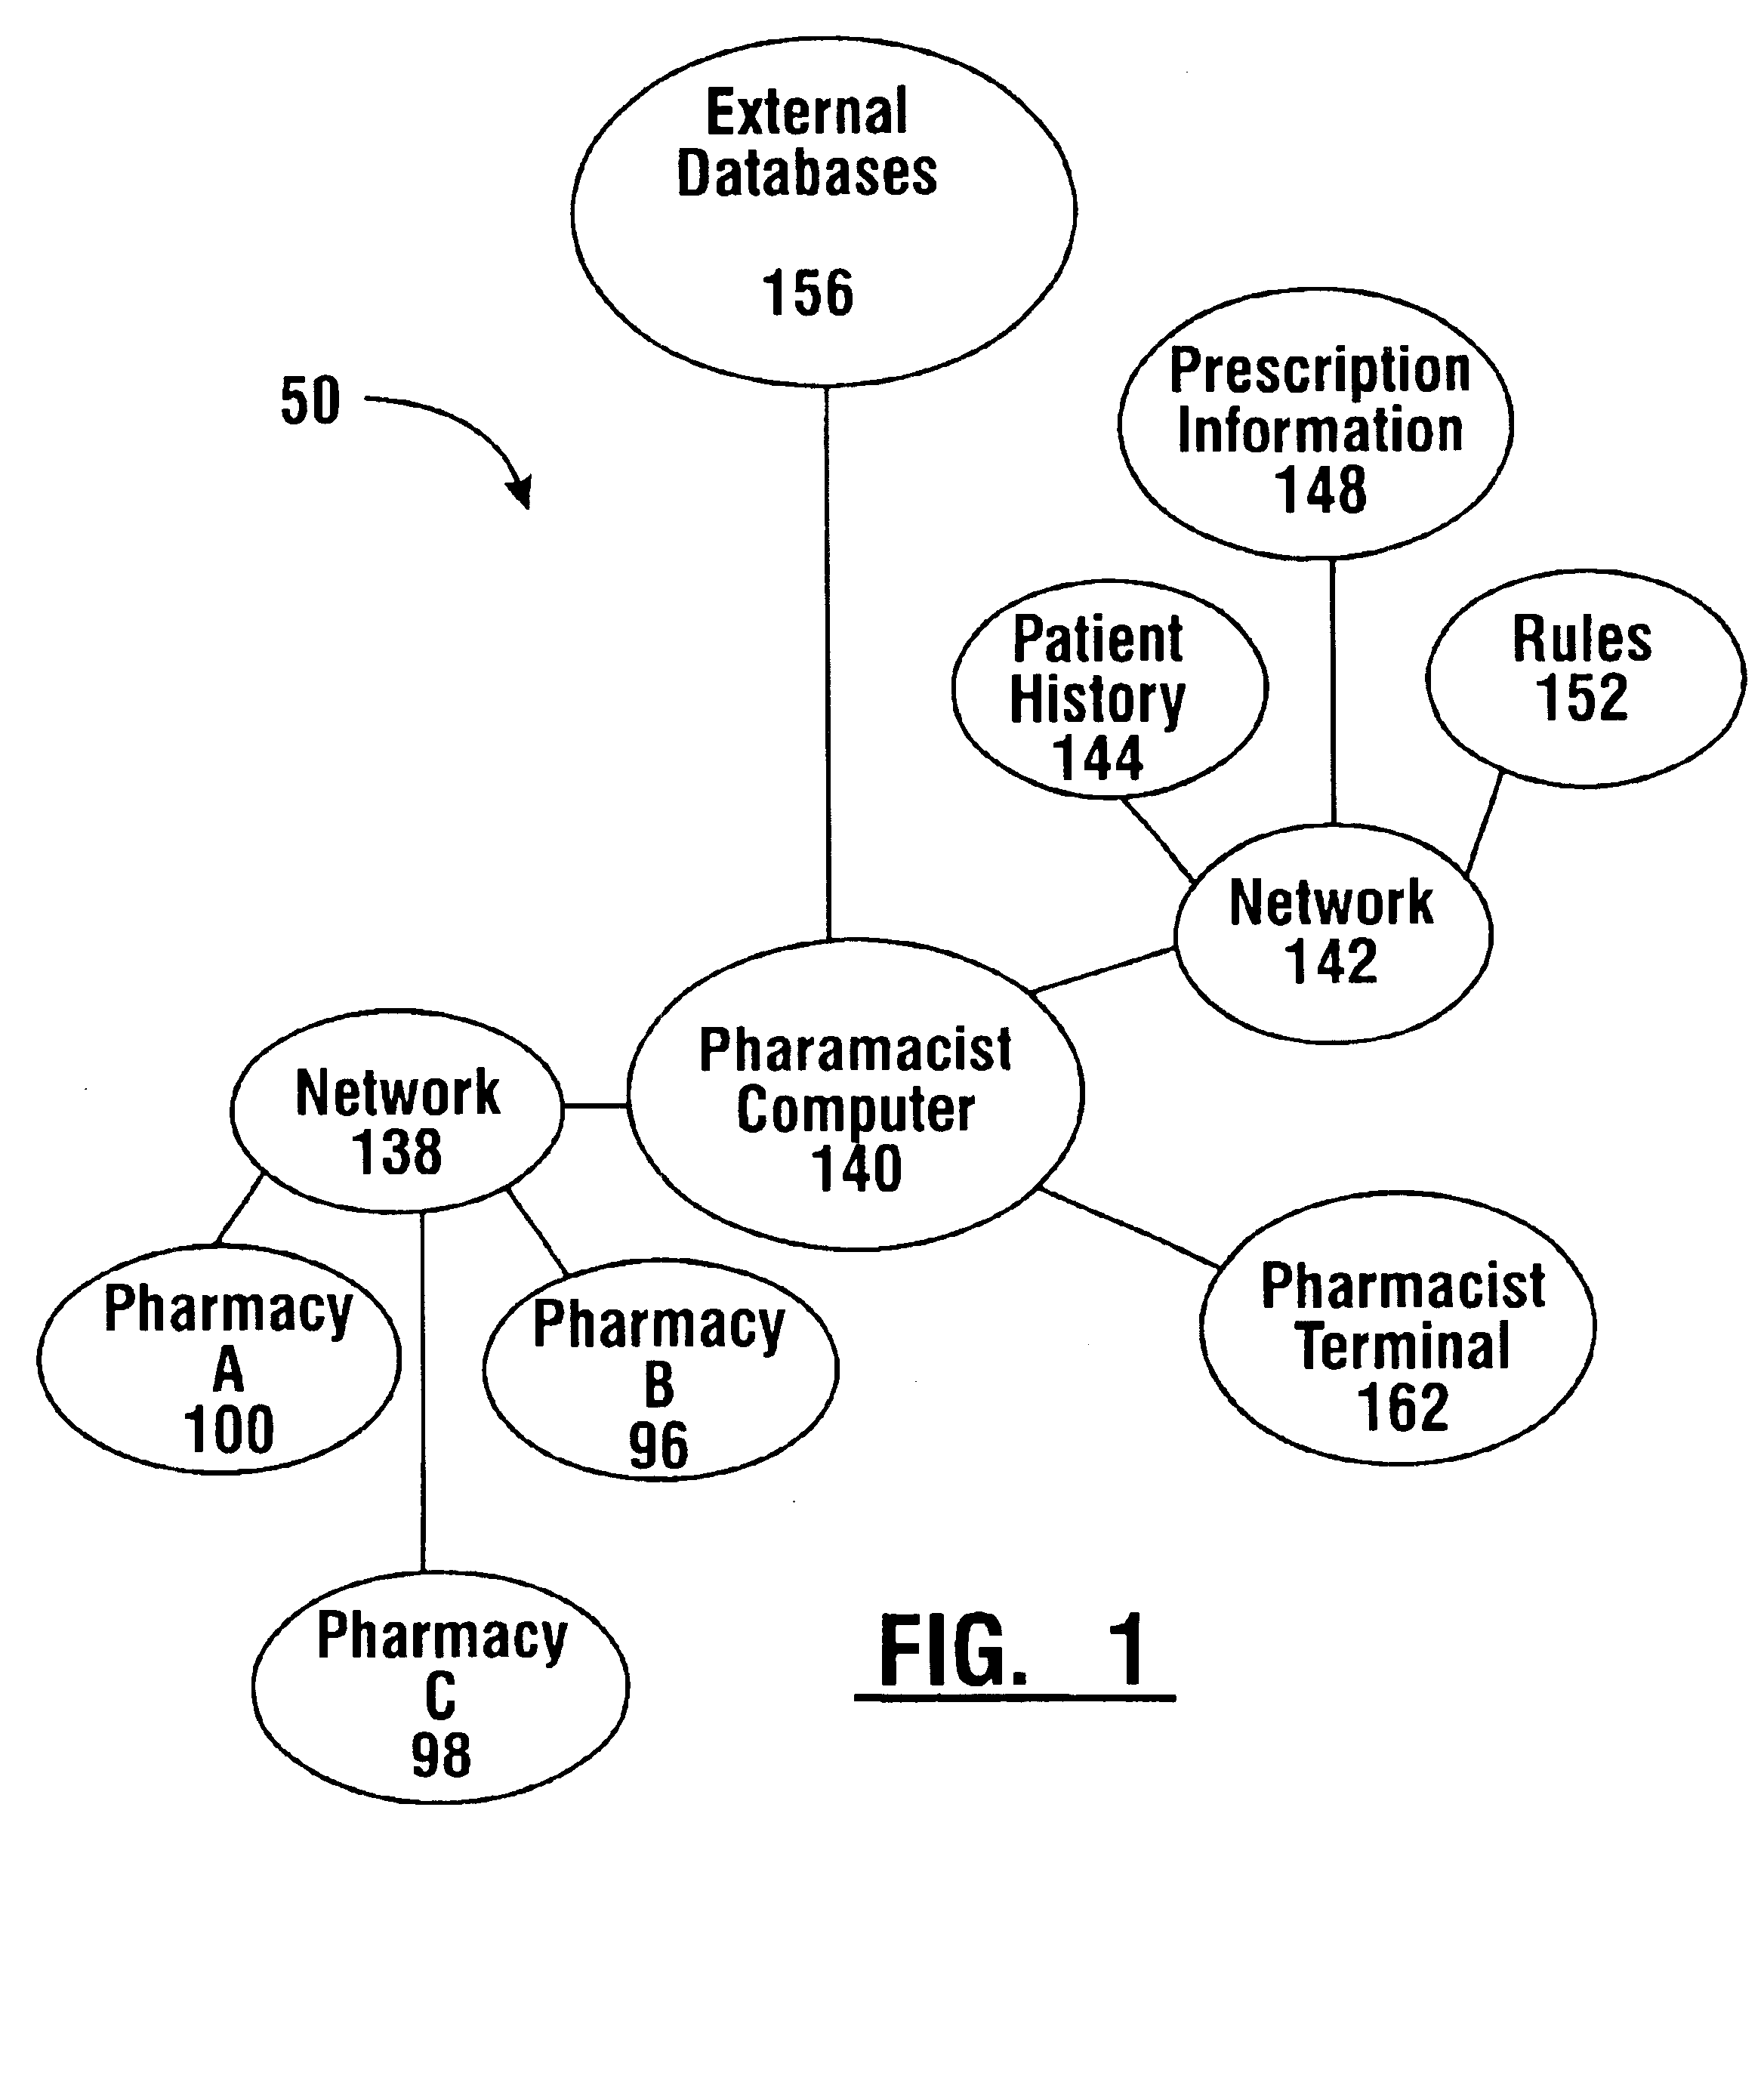 Pharmaceutical system in which pharmaceutical care is provided by a remote professional serving multiple pharmacies